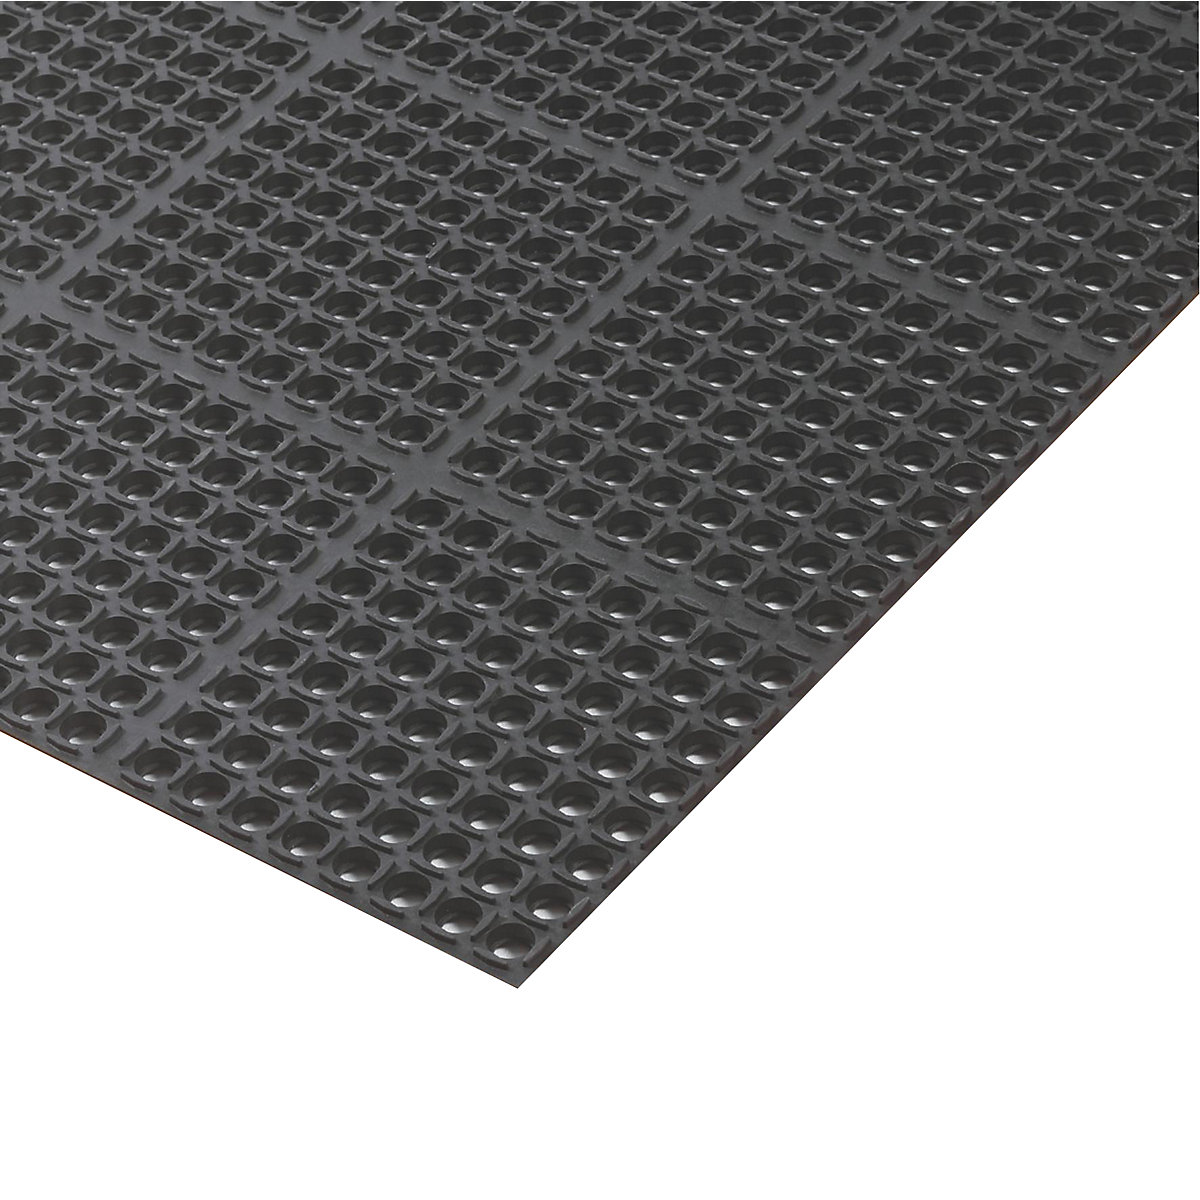 Tapis anti-fatigue Safety Stance – NOTRAX, surface perforée, L x l 1630 x 970 mm-6